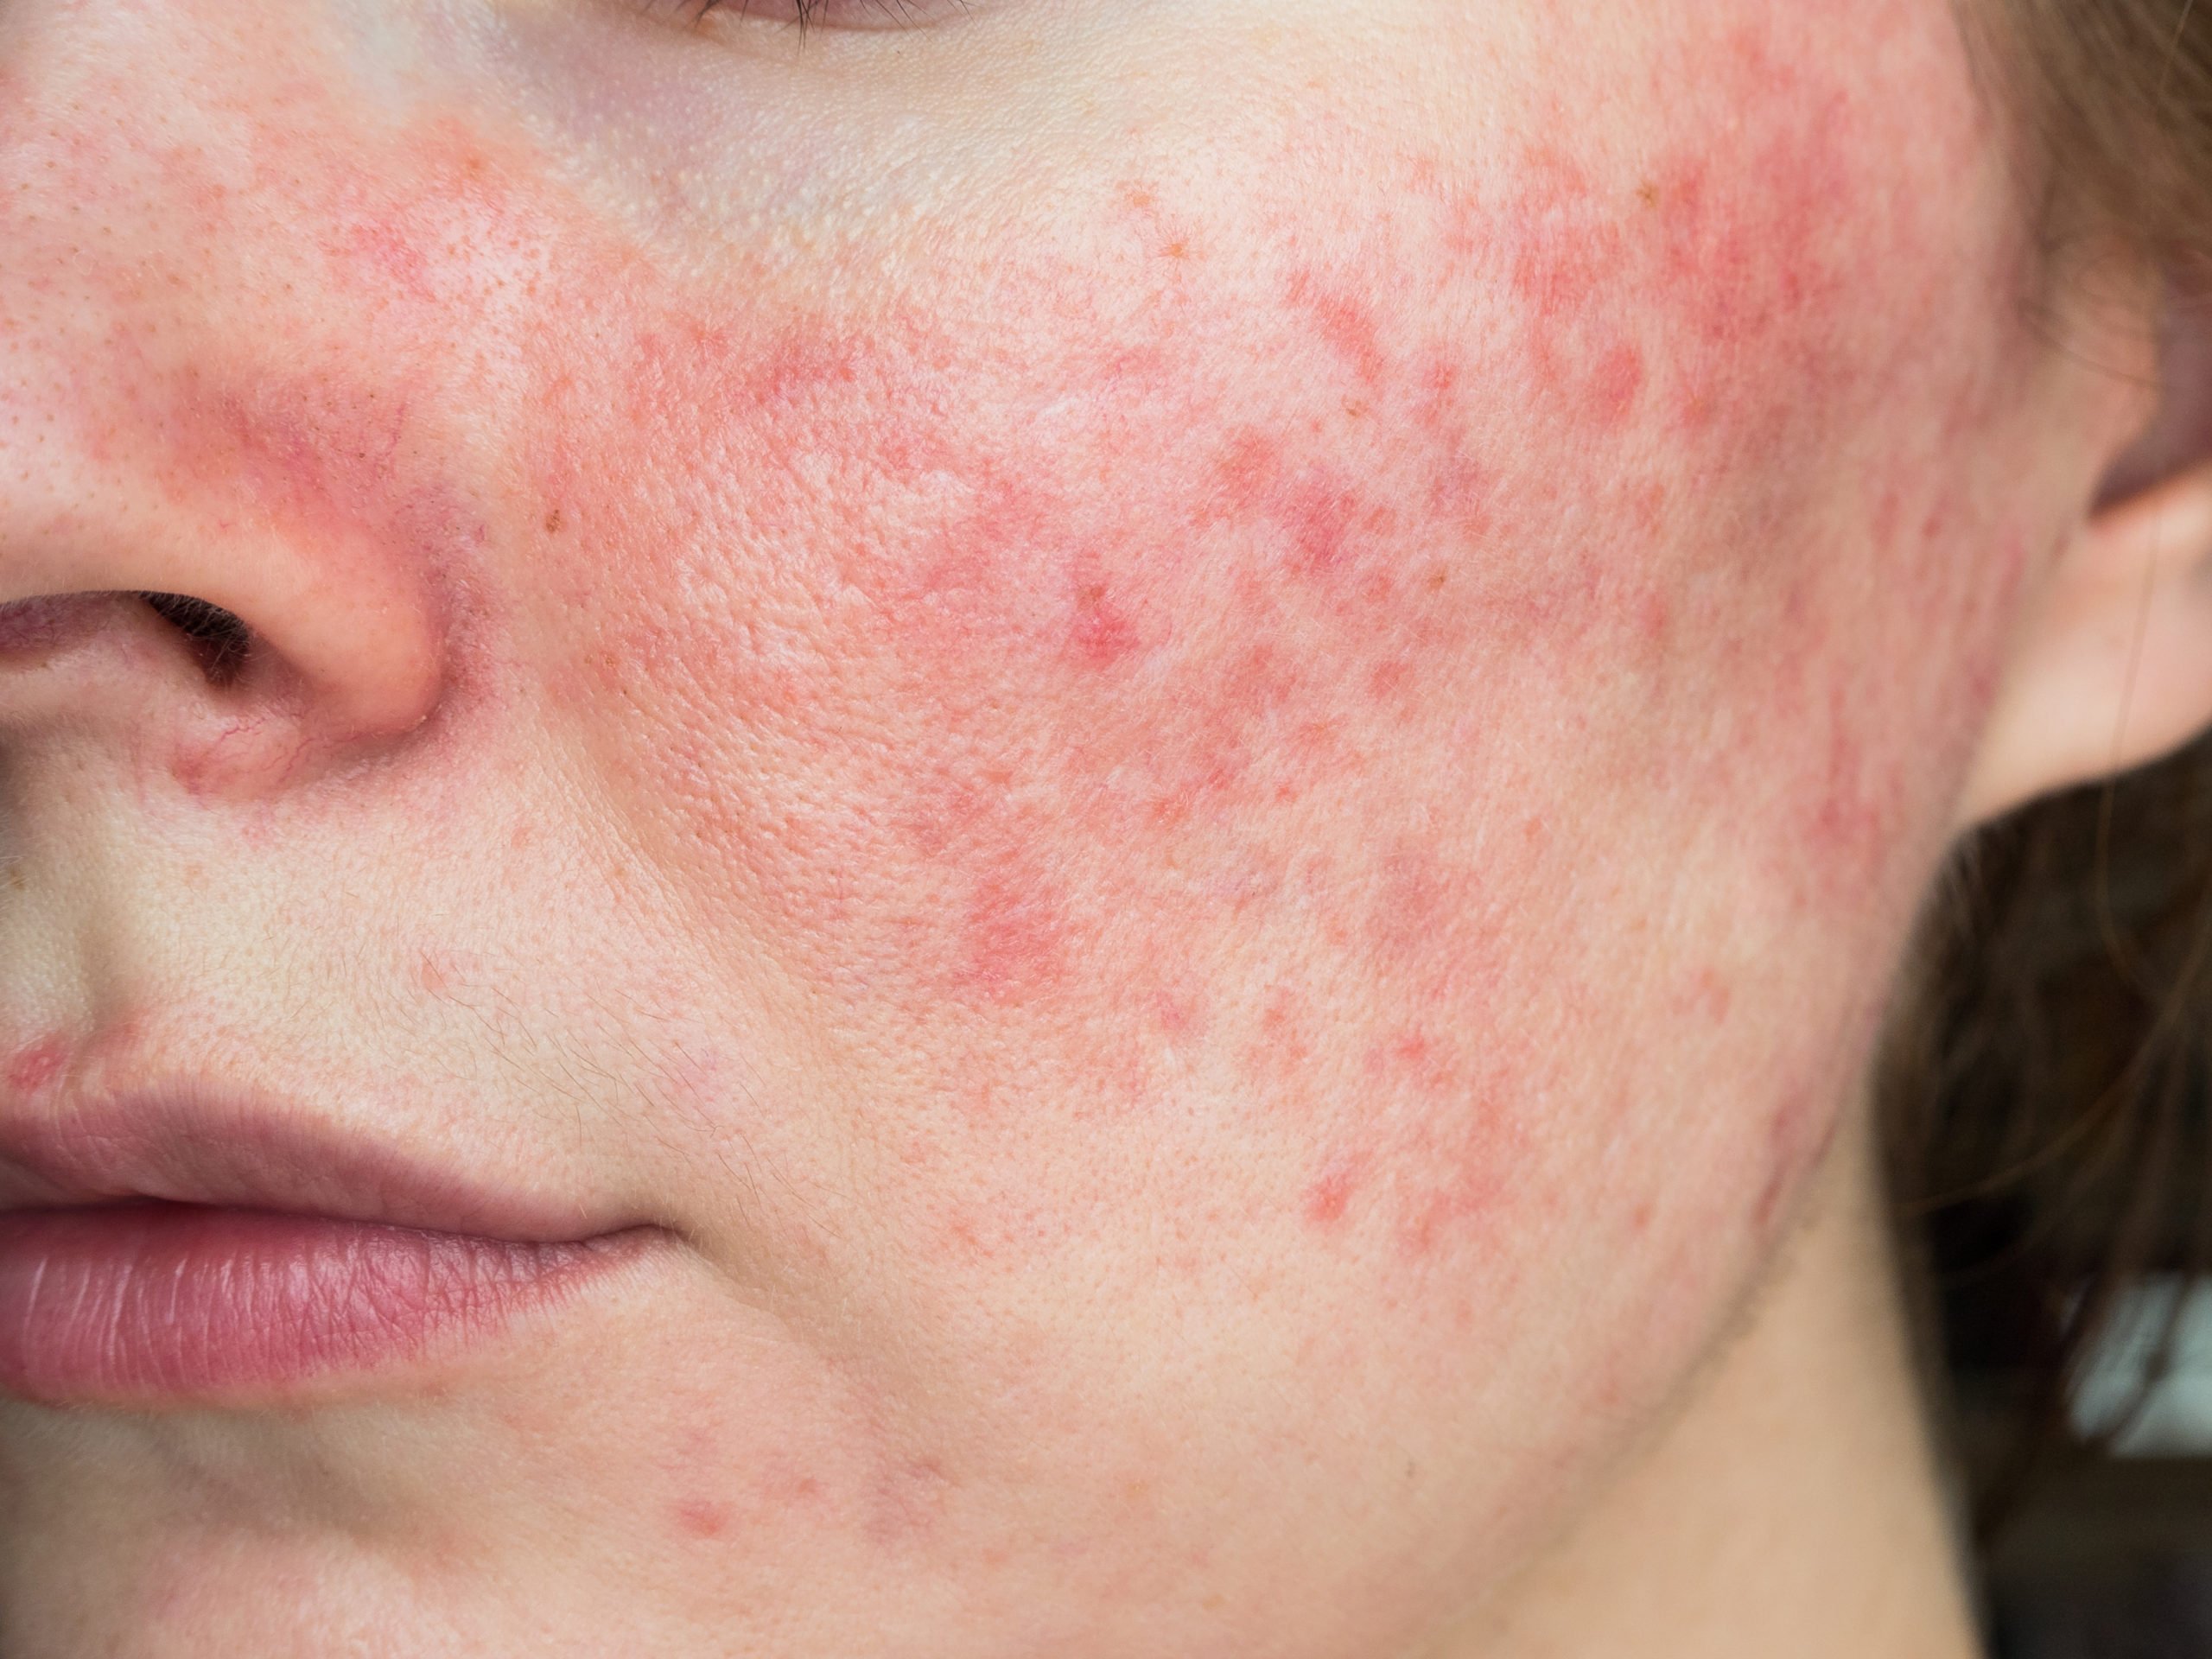 Are There Any New Treatments For Rosacea